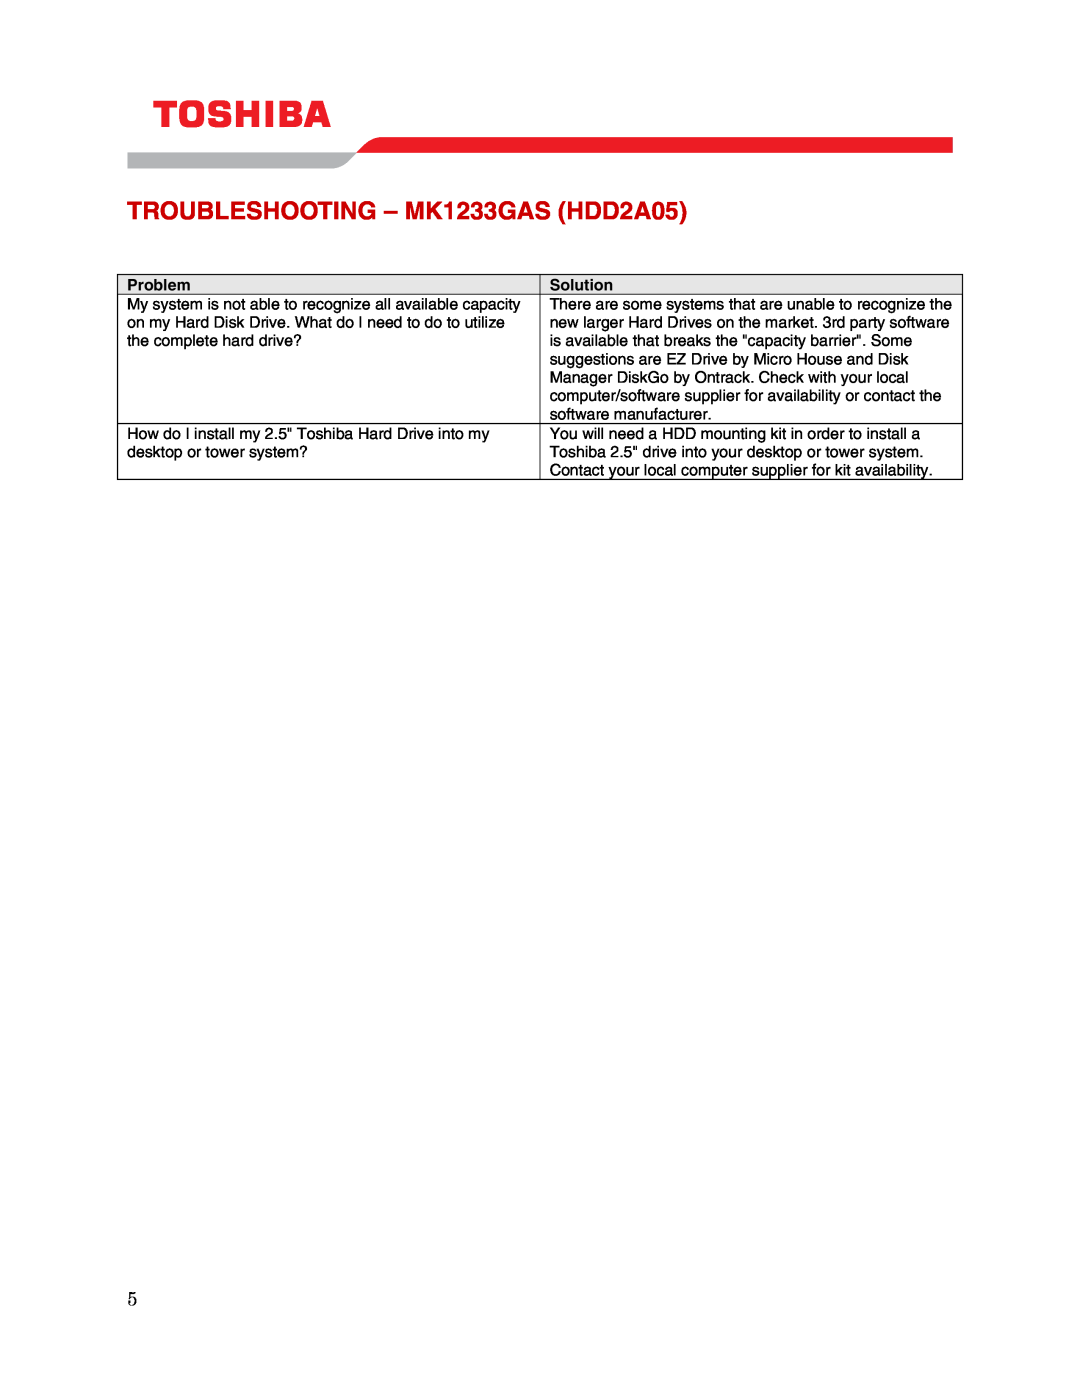 Toshiba user manual TROUBLESHOOTING - MK1233GAS HDD2A05, Problem, Solution 